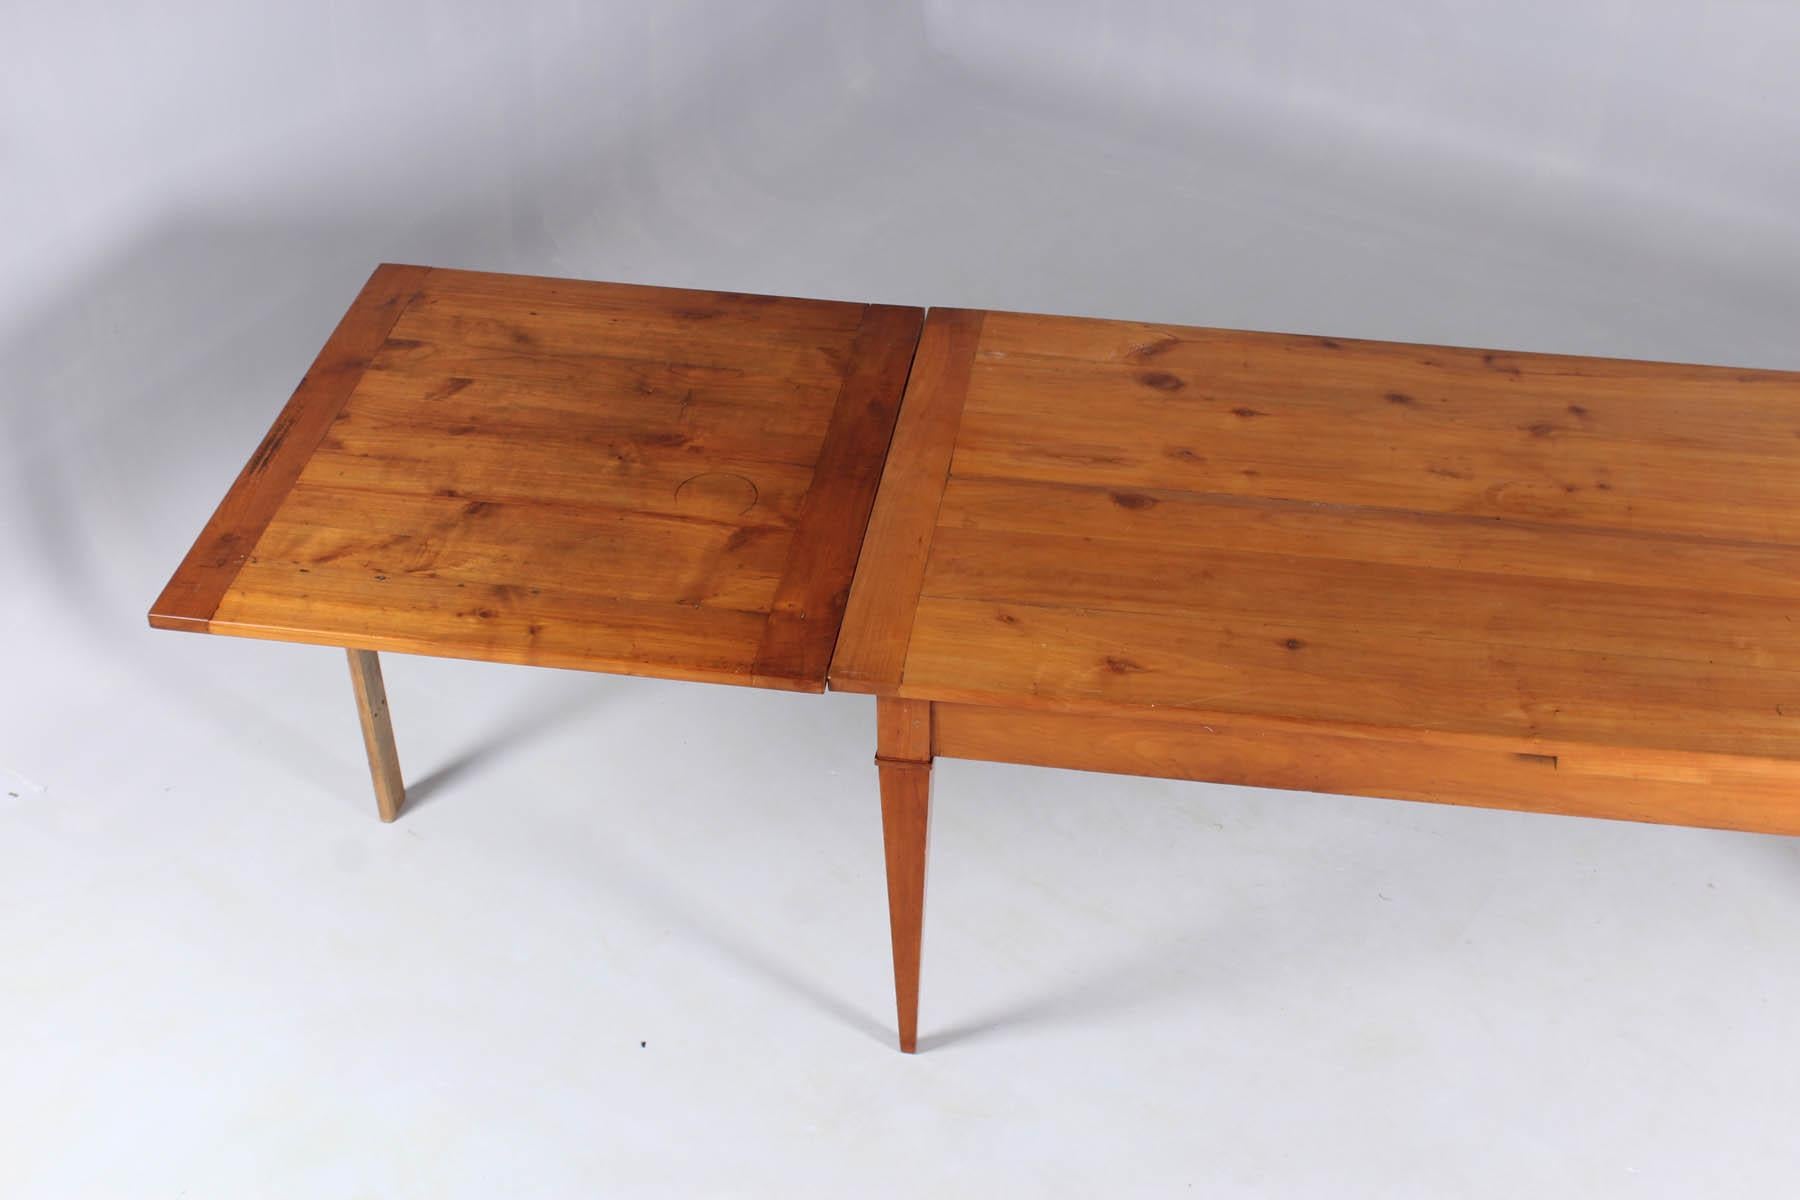 19th Century French Country House Table, 12-14 Persons, Solid Cherry, circa 1850 2